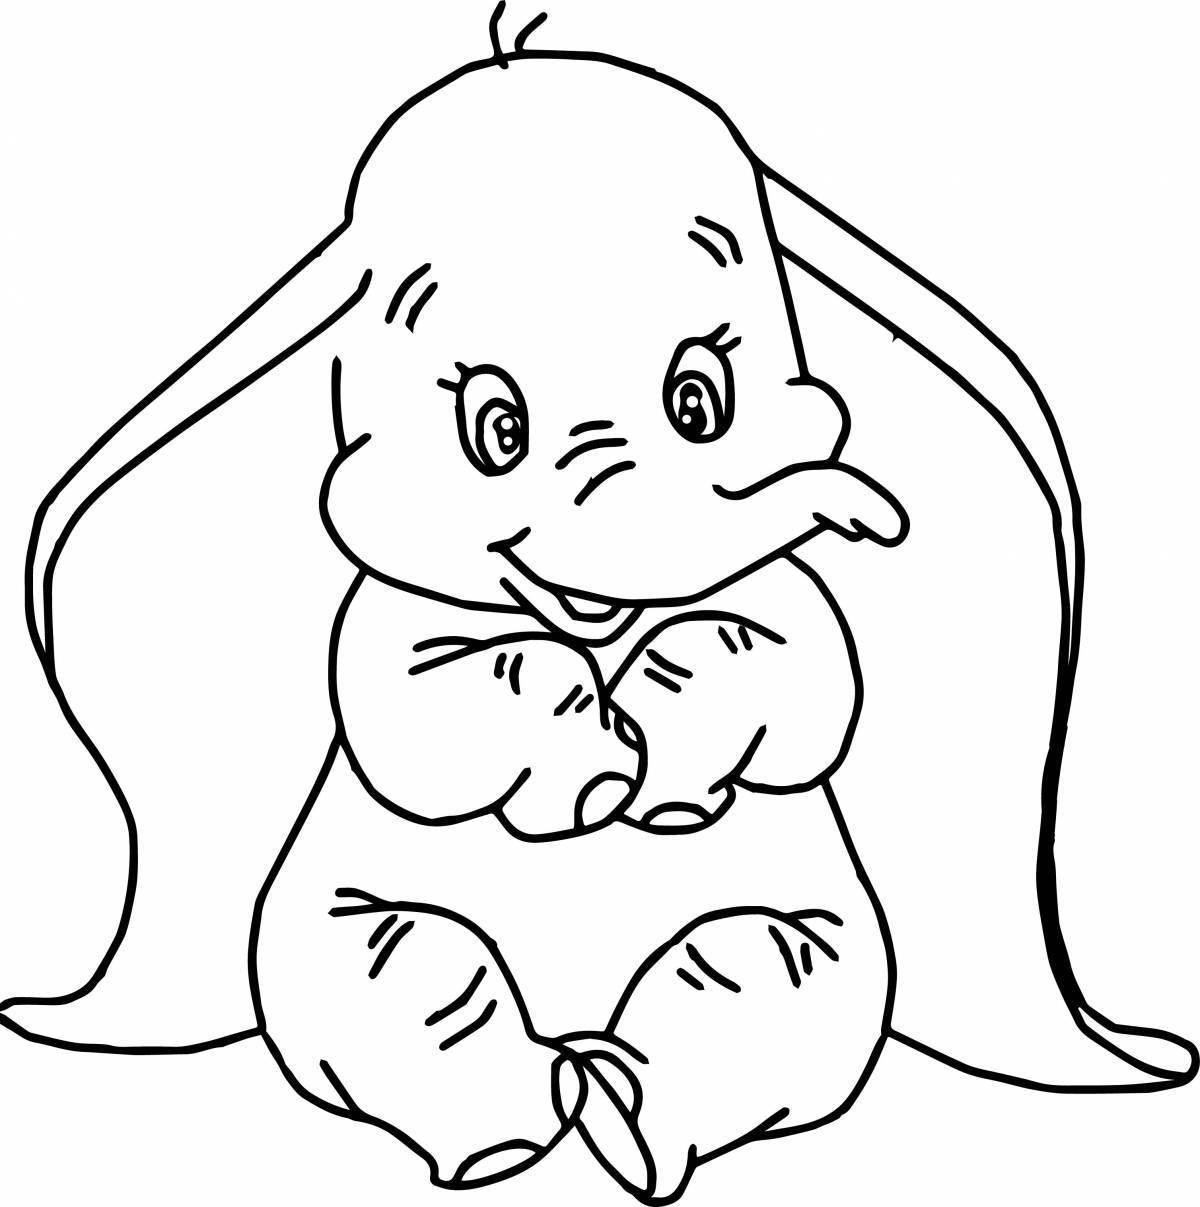 My bunny's adorable coloring book